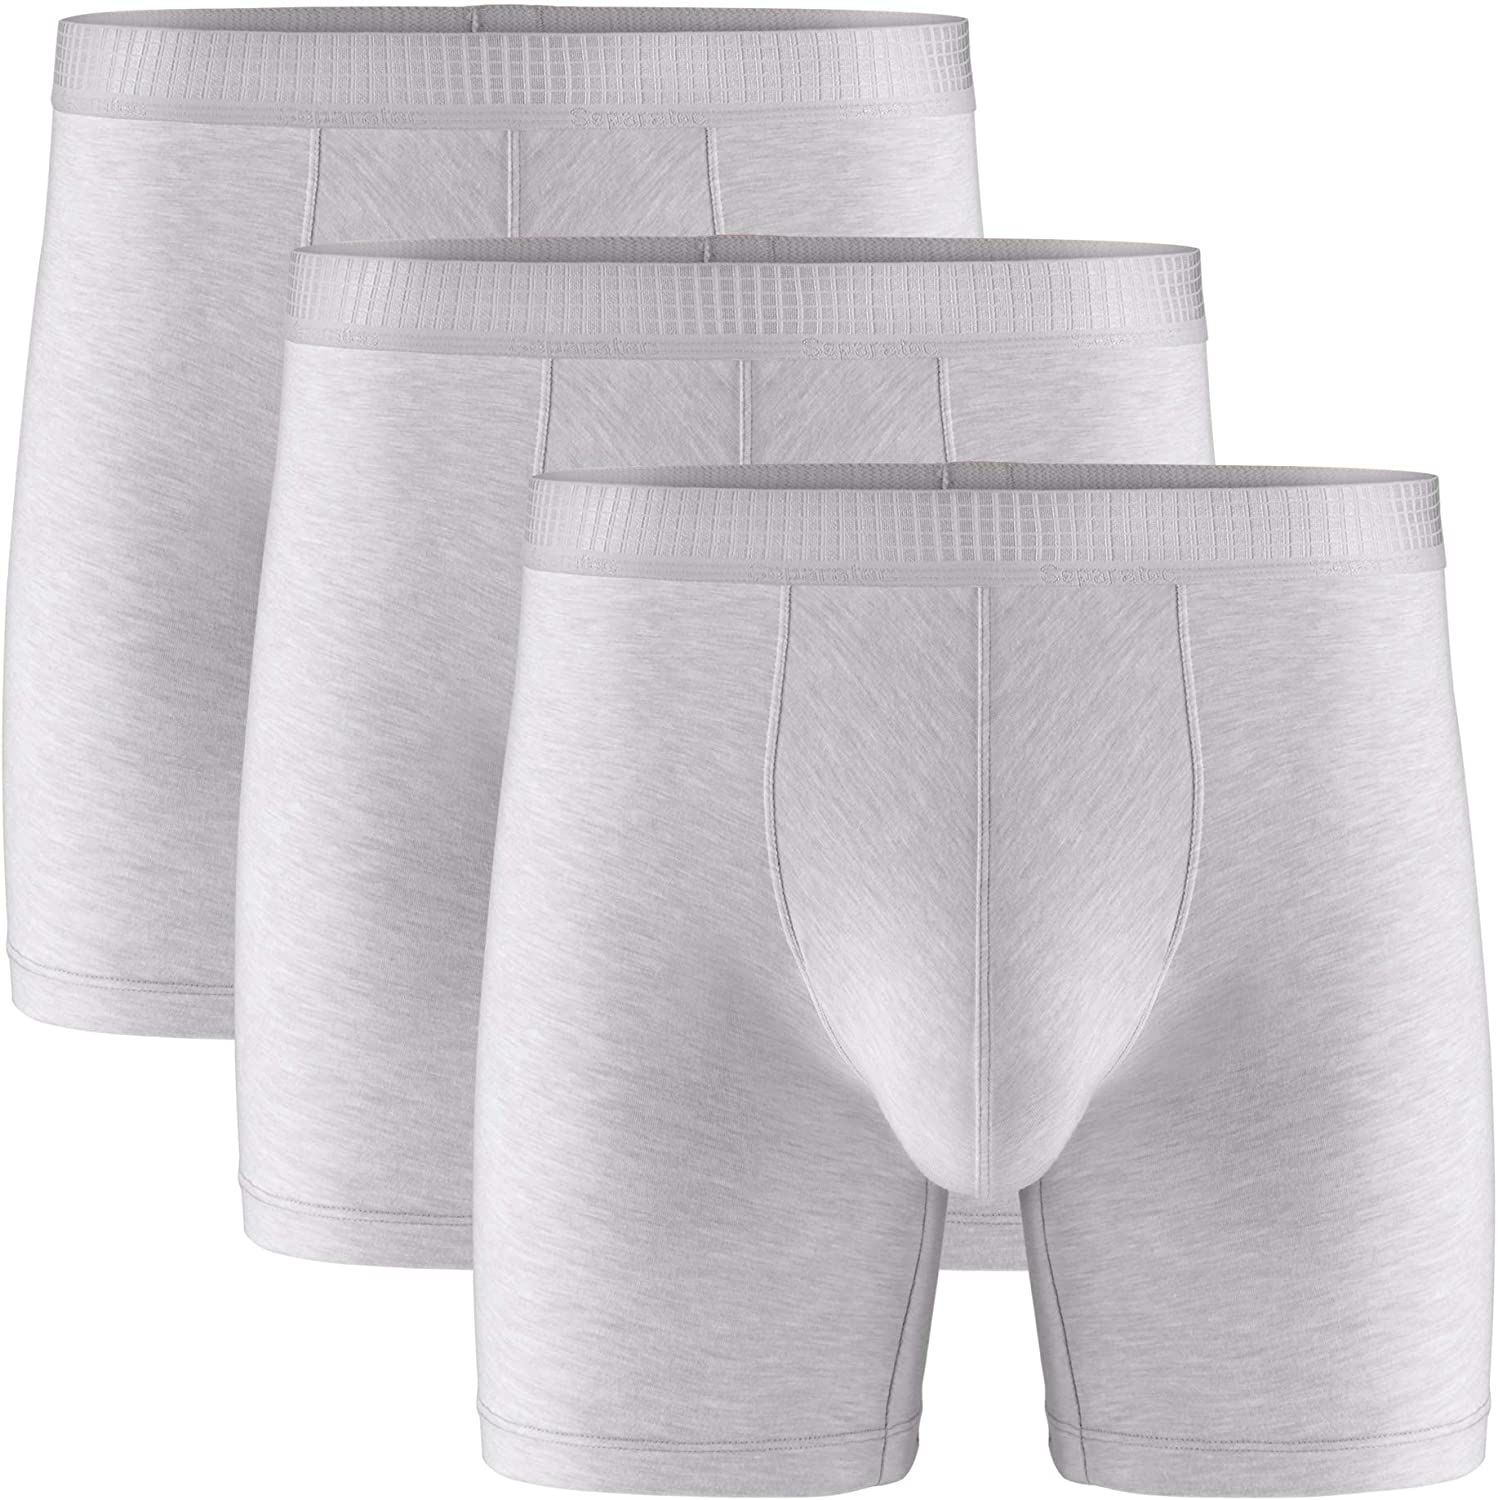 Ultra Soft MicroModal Boxer Briefs 3 Pack - Separatec